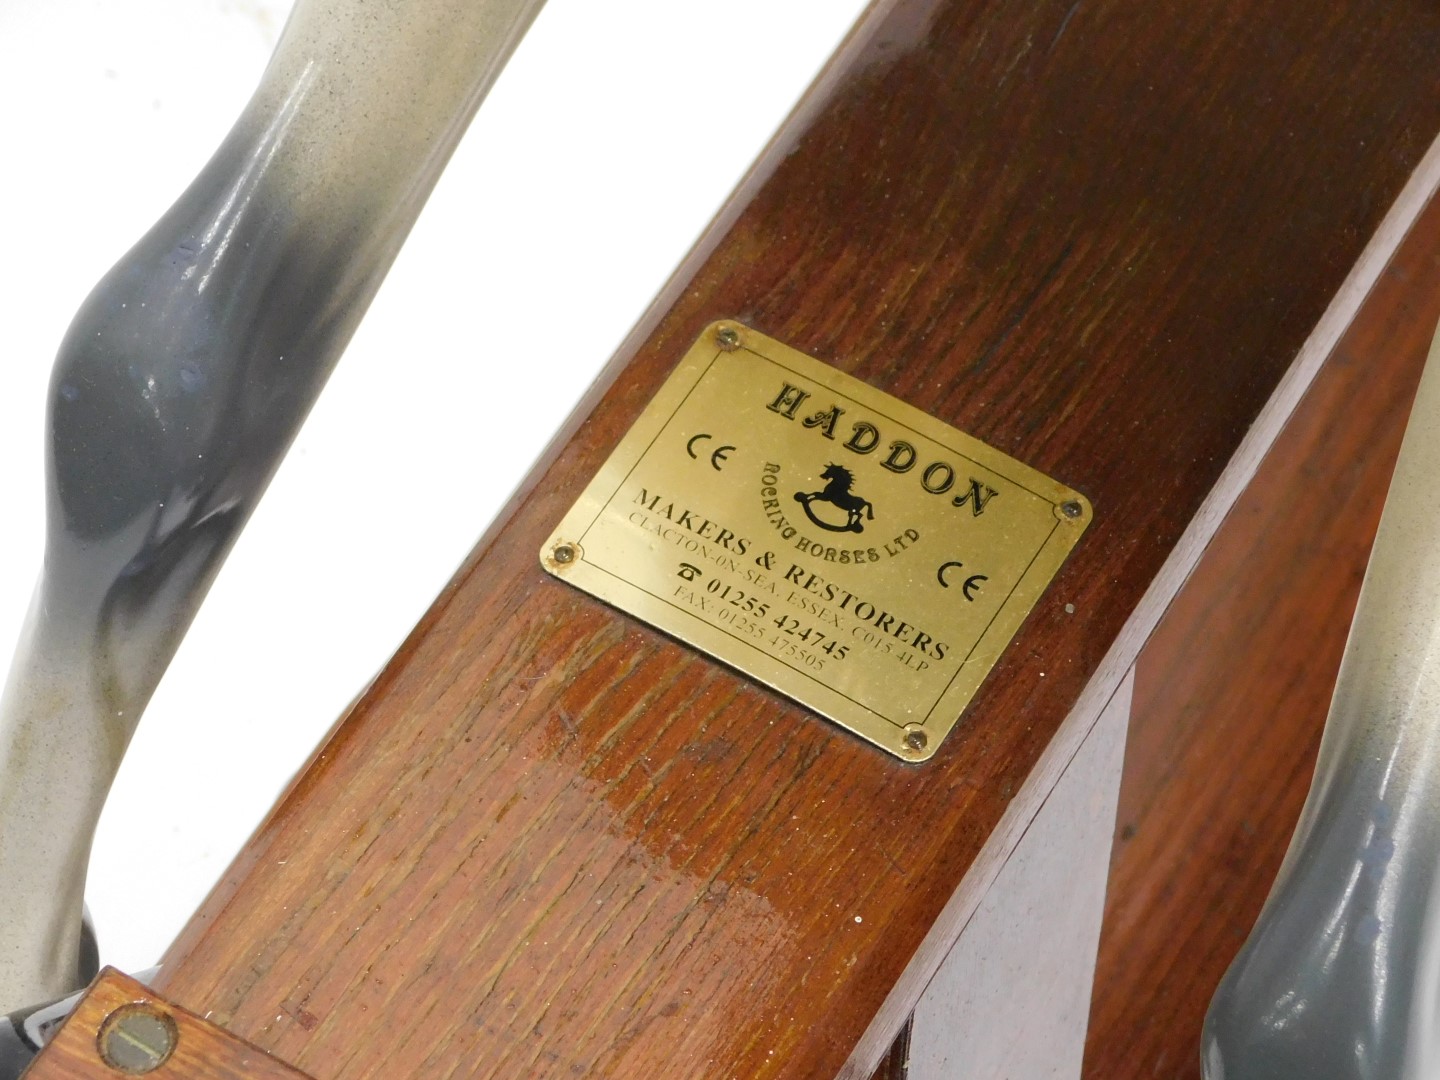 A Haddon dapple grey rocking horse, on a wooden base, brass manufacturers plaque for Haddon Makers & - Image 2 of 4